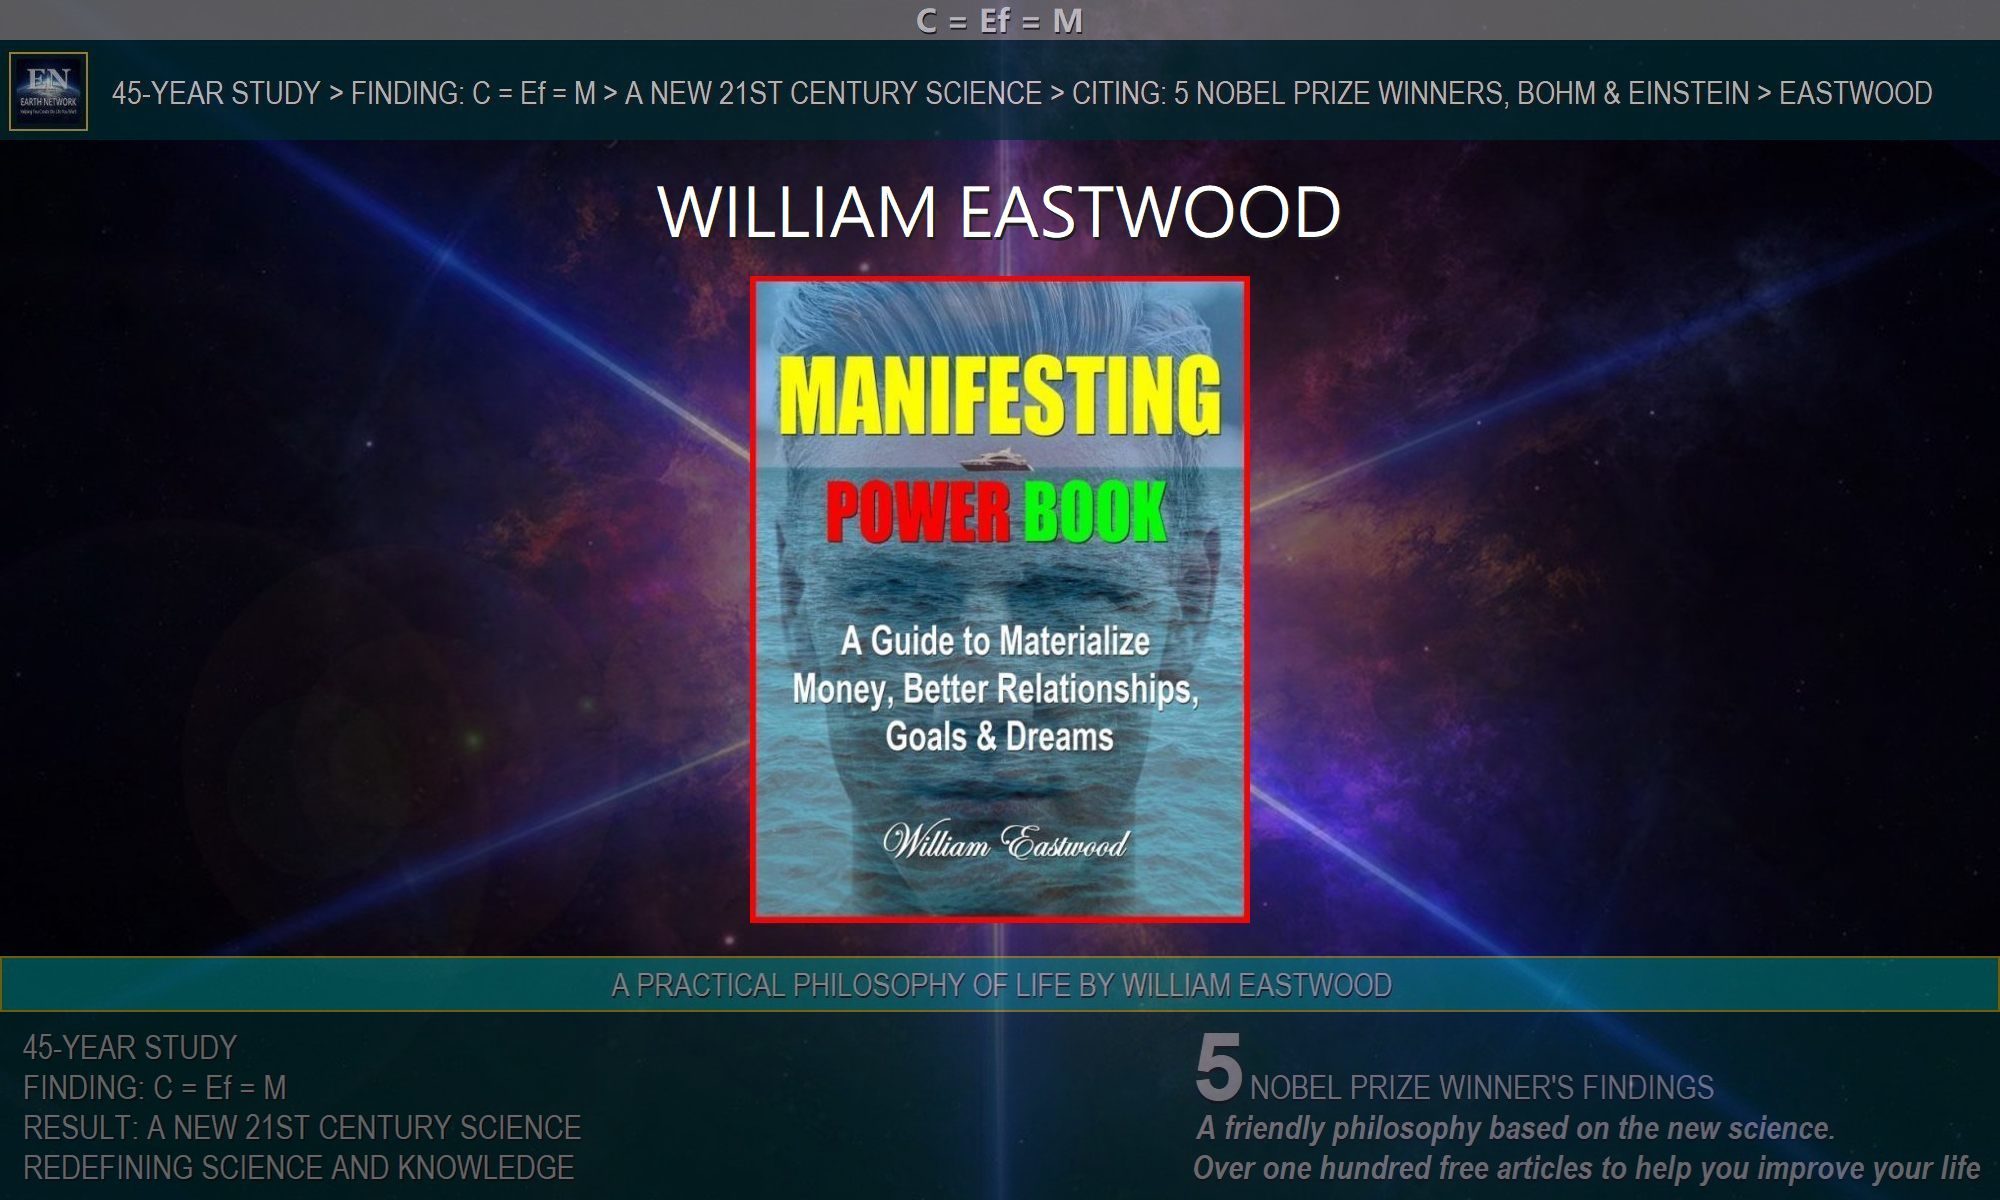 manifesting-power-book-a-guide-to-materialize-money-better-relationships-goals-dreams-William-Eastwood-2020-book-ebook-illustration